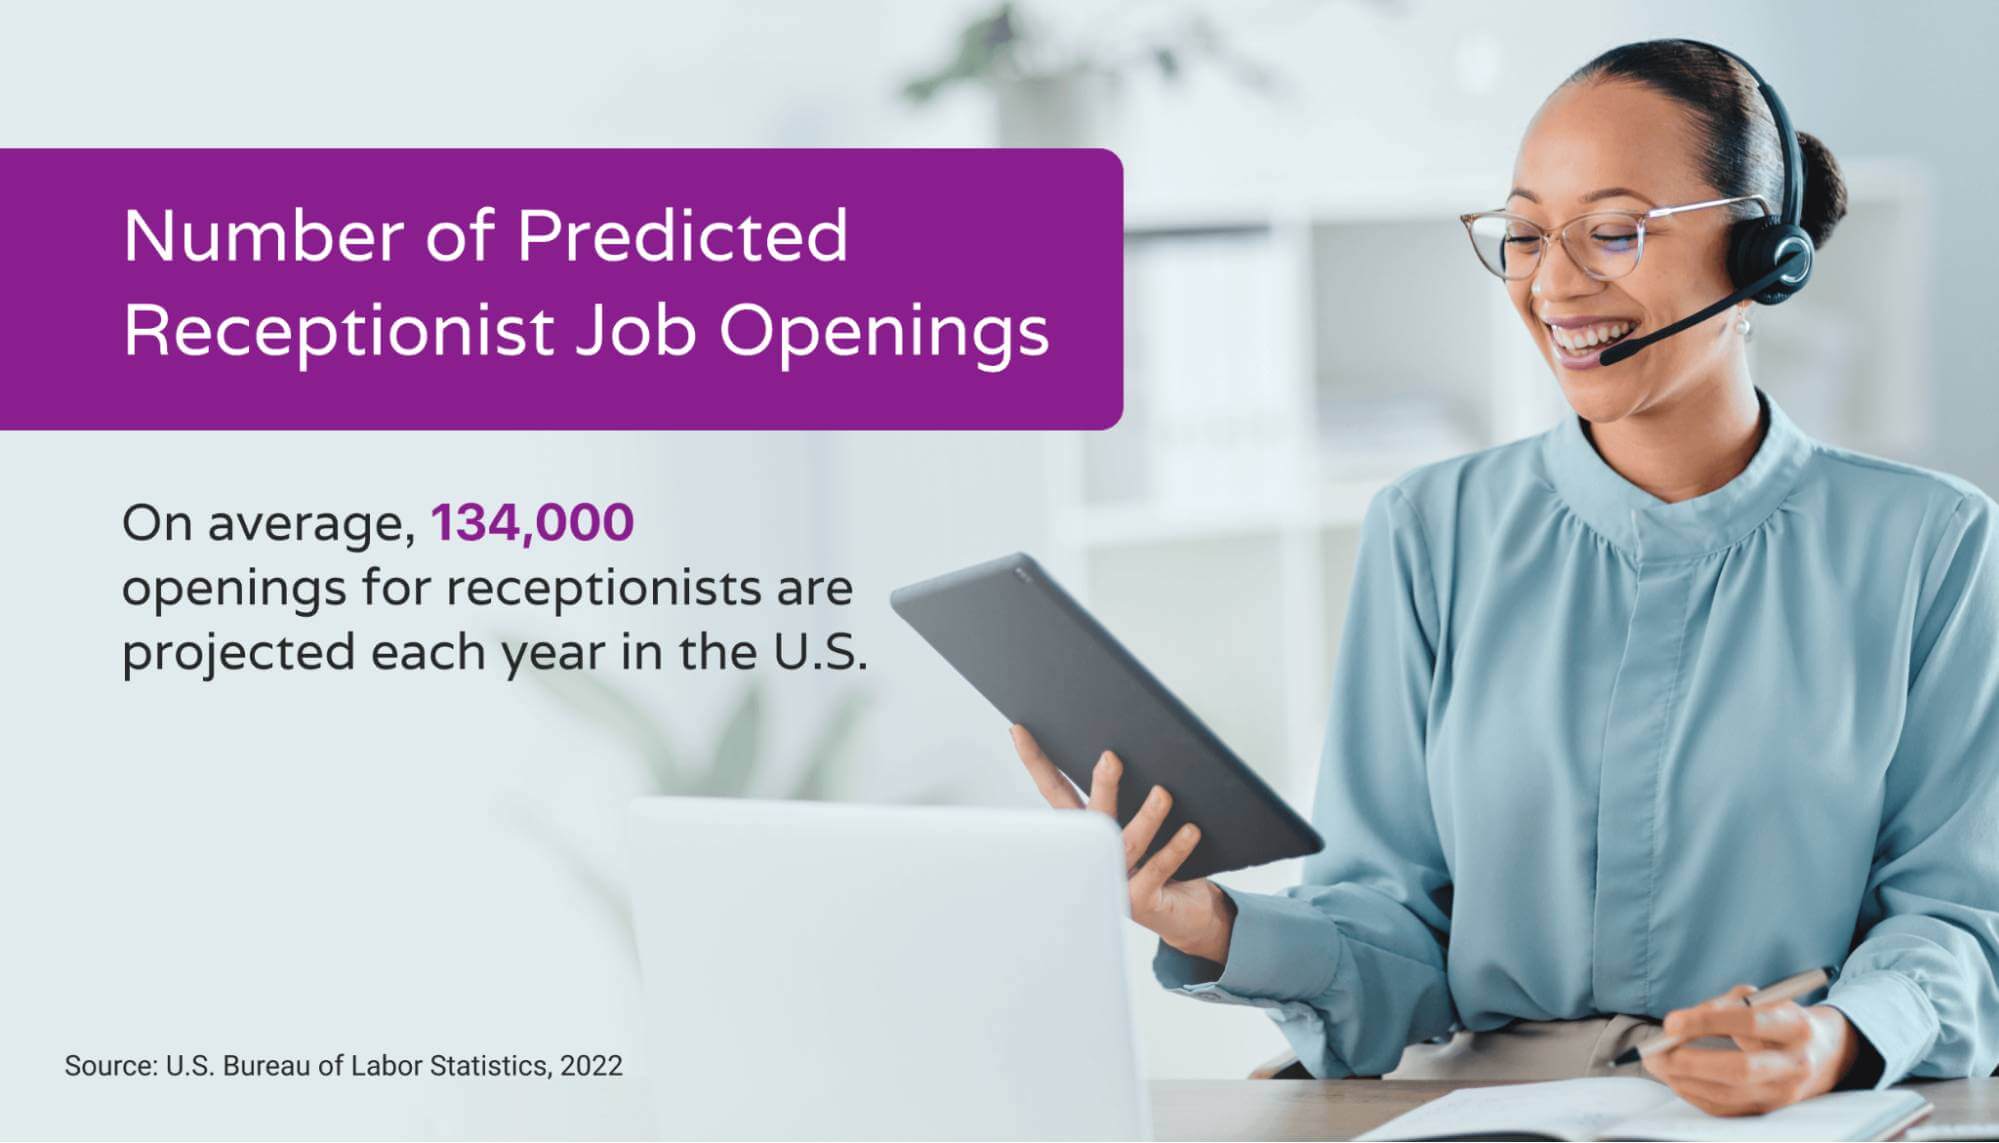 Image showing the average yearly number of receptionist job openings in the US